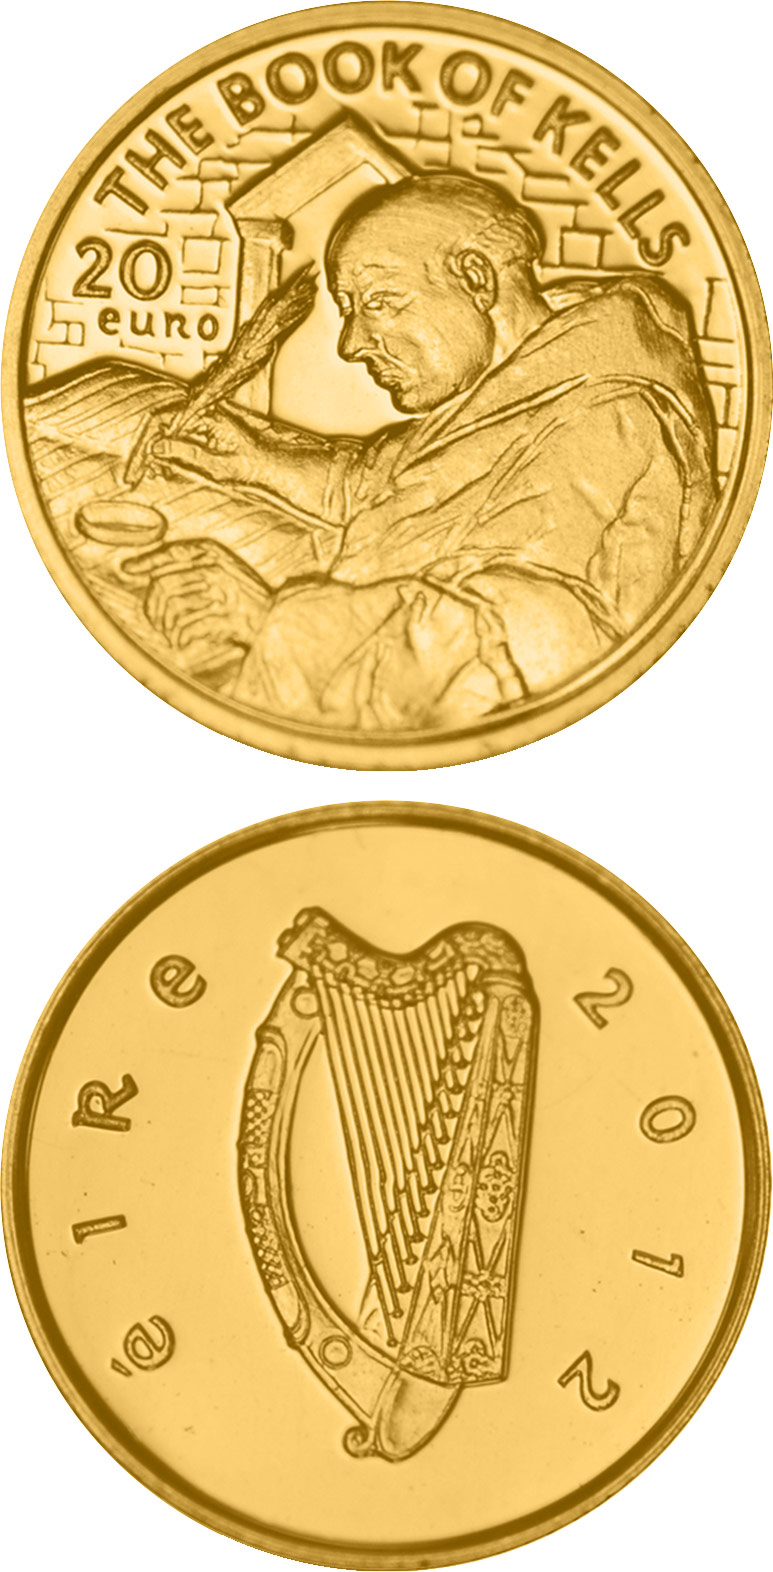 Image of 20 euro coin - Book of Kells | Ireland 2012.  The Gold coin is of Proof quality.